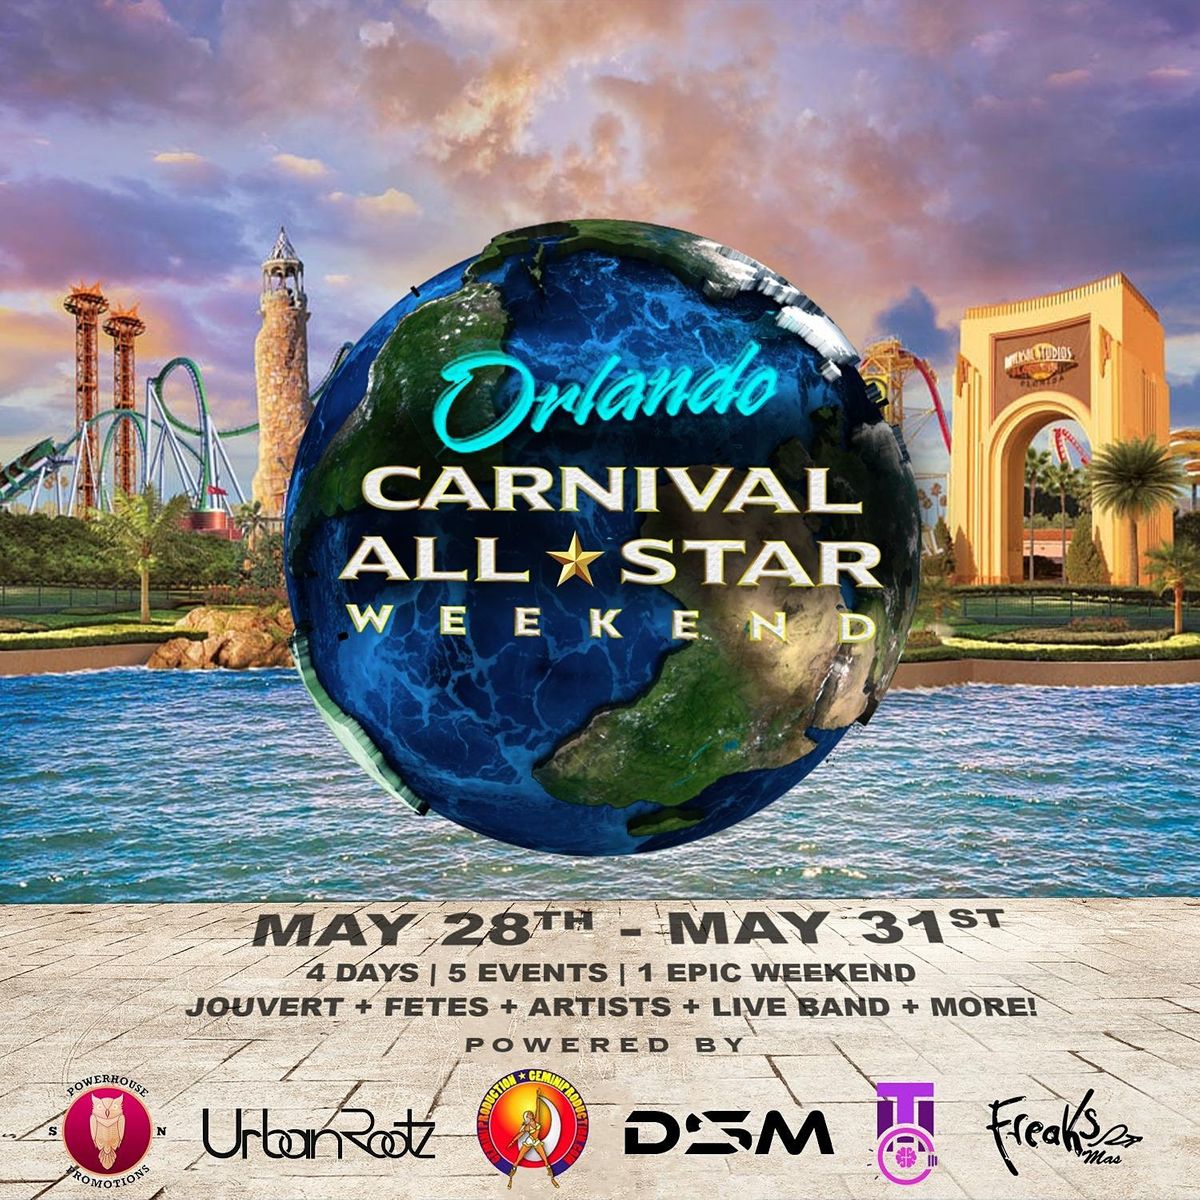 Orlando Carnival All Star Weekend (EVENTS ONLY PACKAGES), Central Florida Fair, Orlando, 28 May